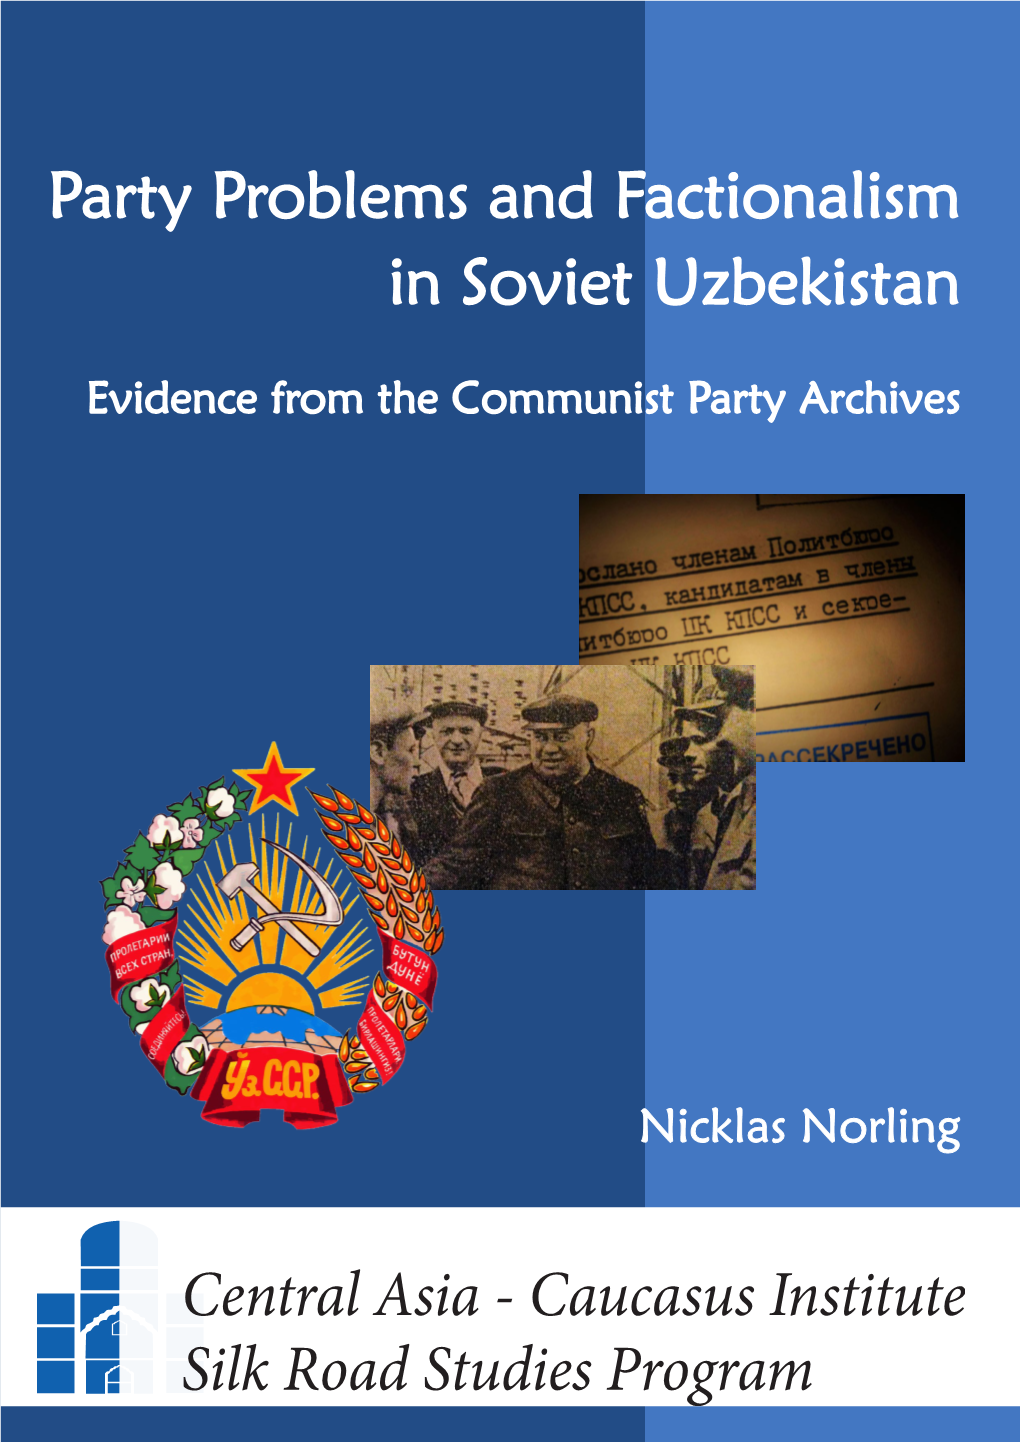 Party Problems and Factionalism in Soviet Uzbekistan